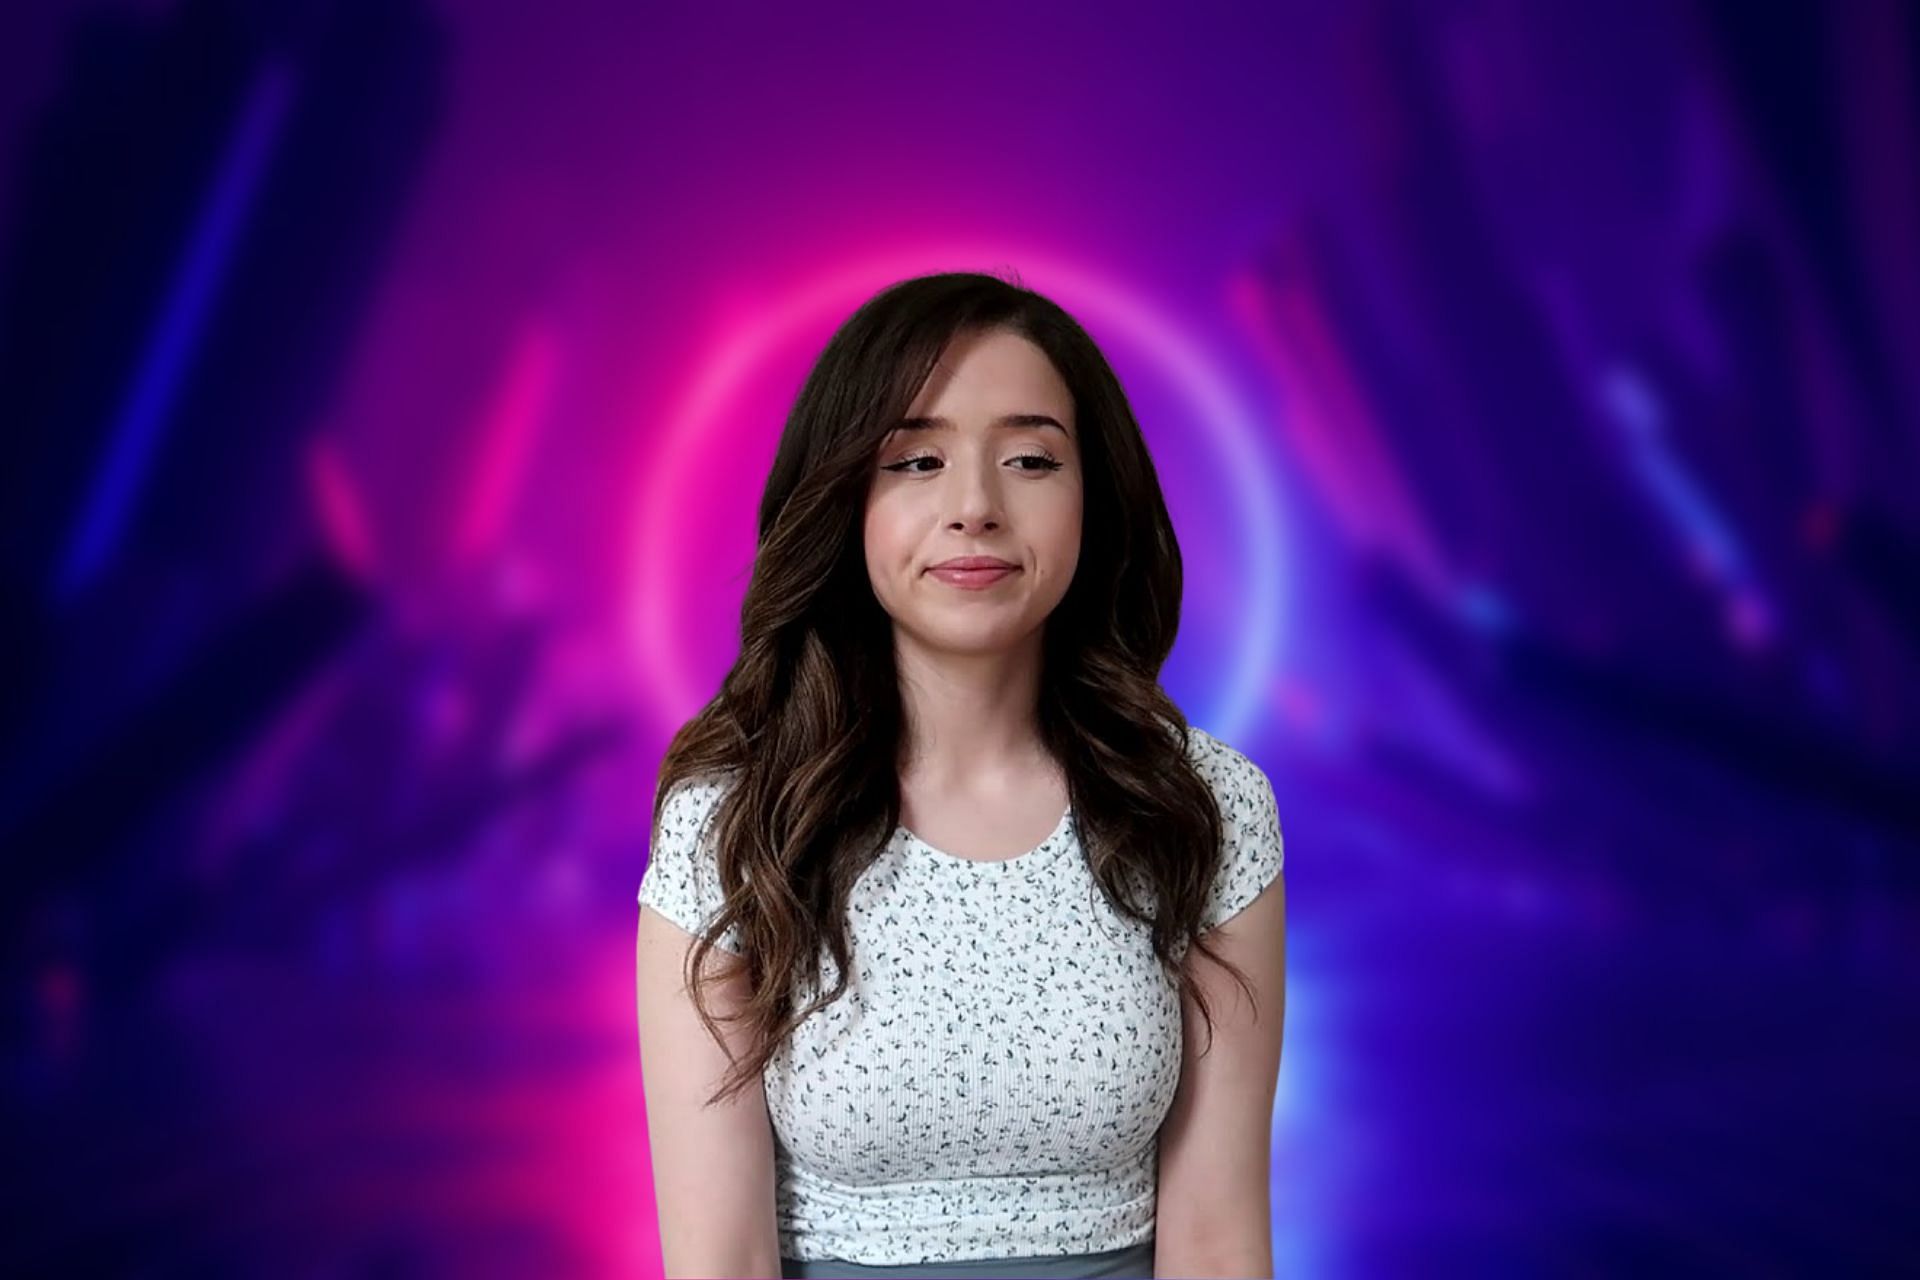 Pokimane recently dropped a cryptic tweet about loyalty that has fans talking (Image via Sportskeeda)